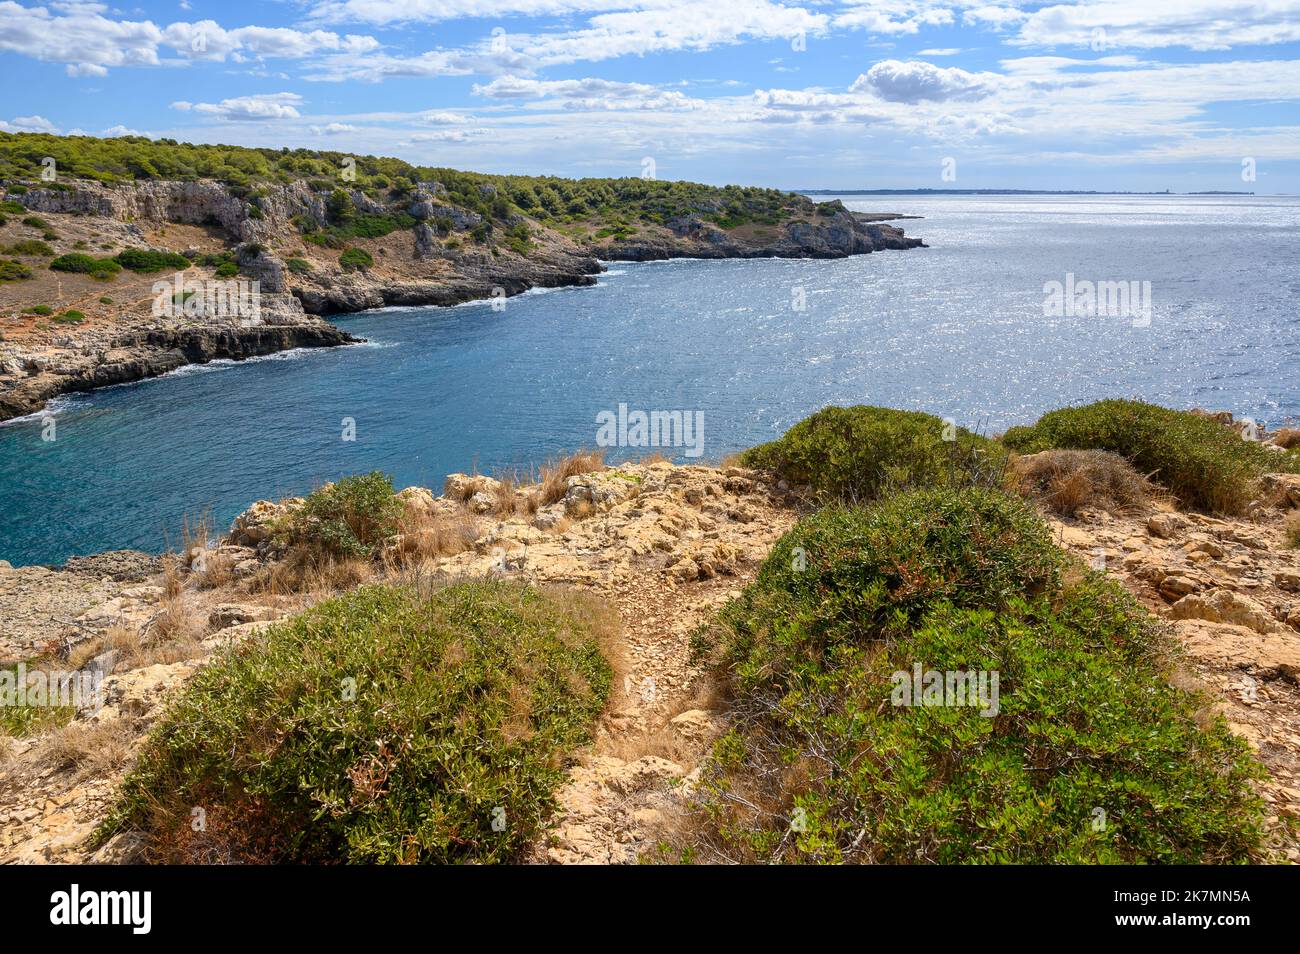 View to the Regional Natural Park of Porto Selvaggio with its rugged coastline and pine woods, Apulia (Puglia), Italy. Stock Photo